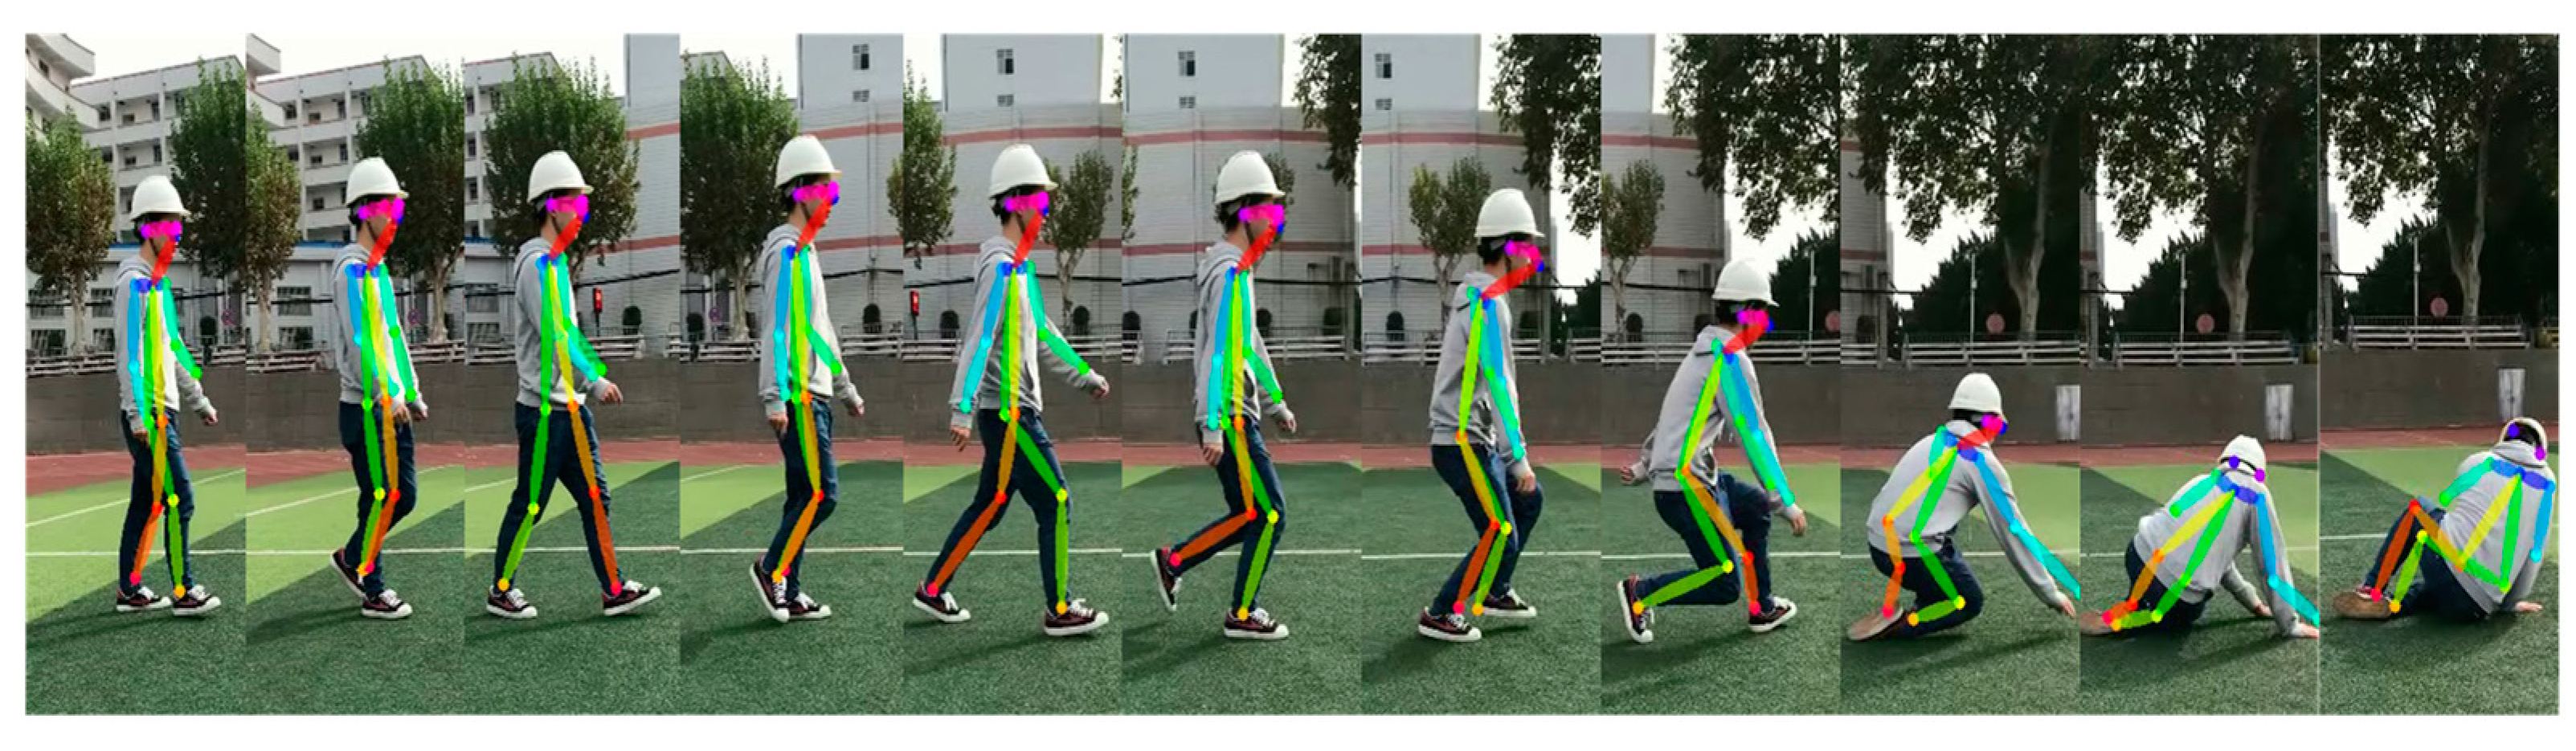 PDF) DriPE: A Dataset for Human Pose Estimation in Real-World Driving  Settings | Laure Tougne - Academia.edu